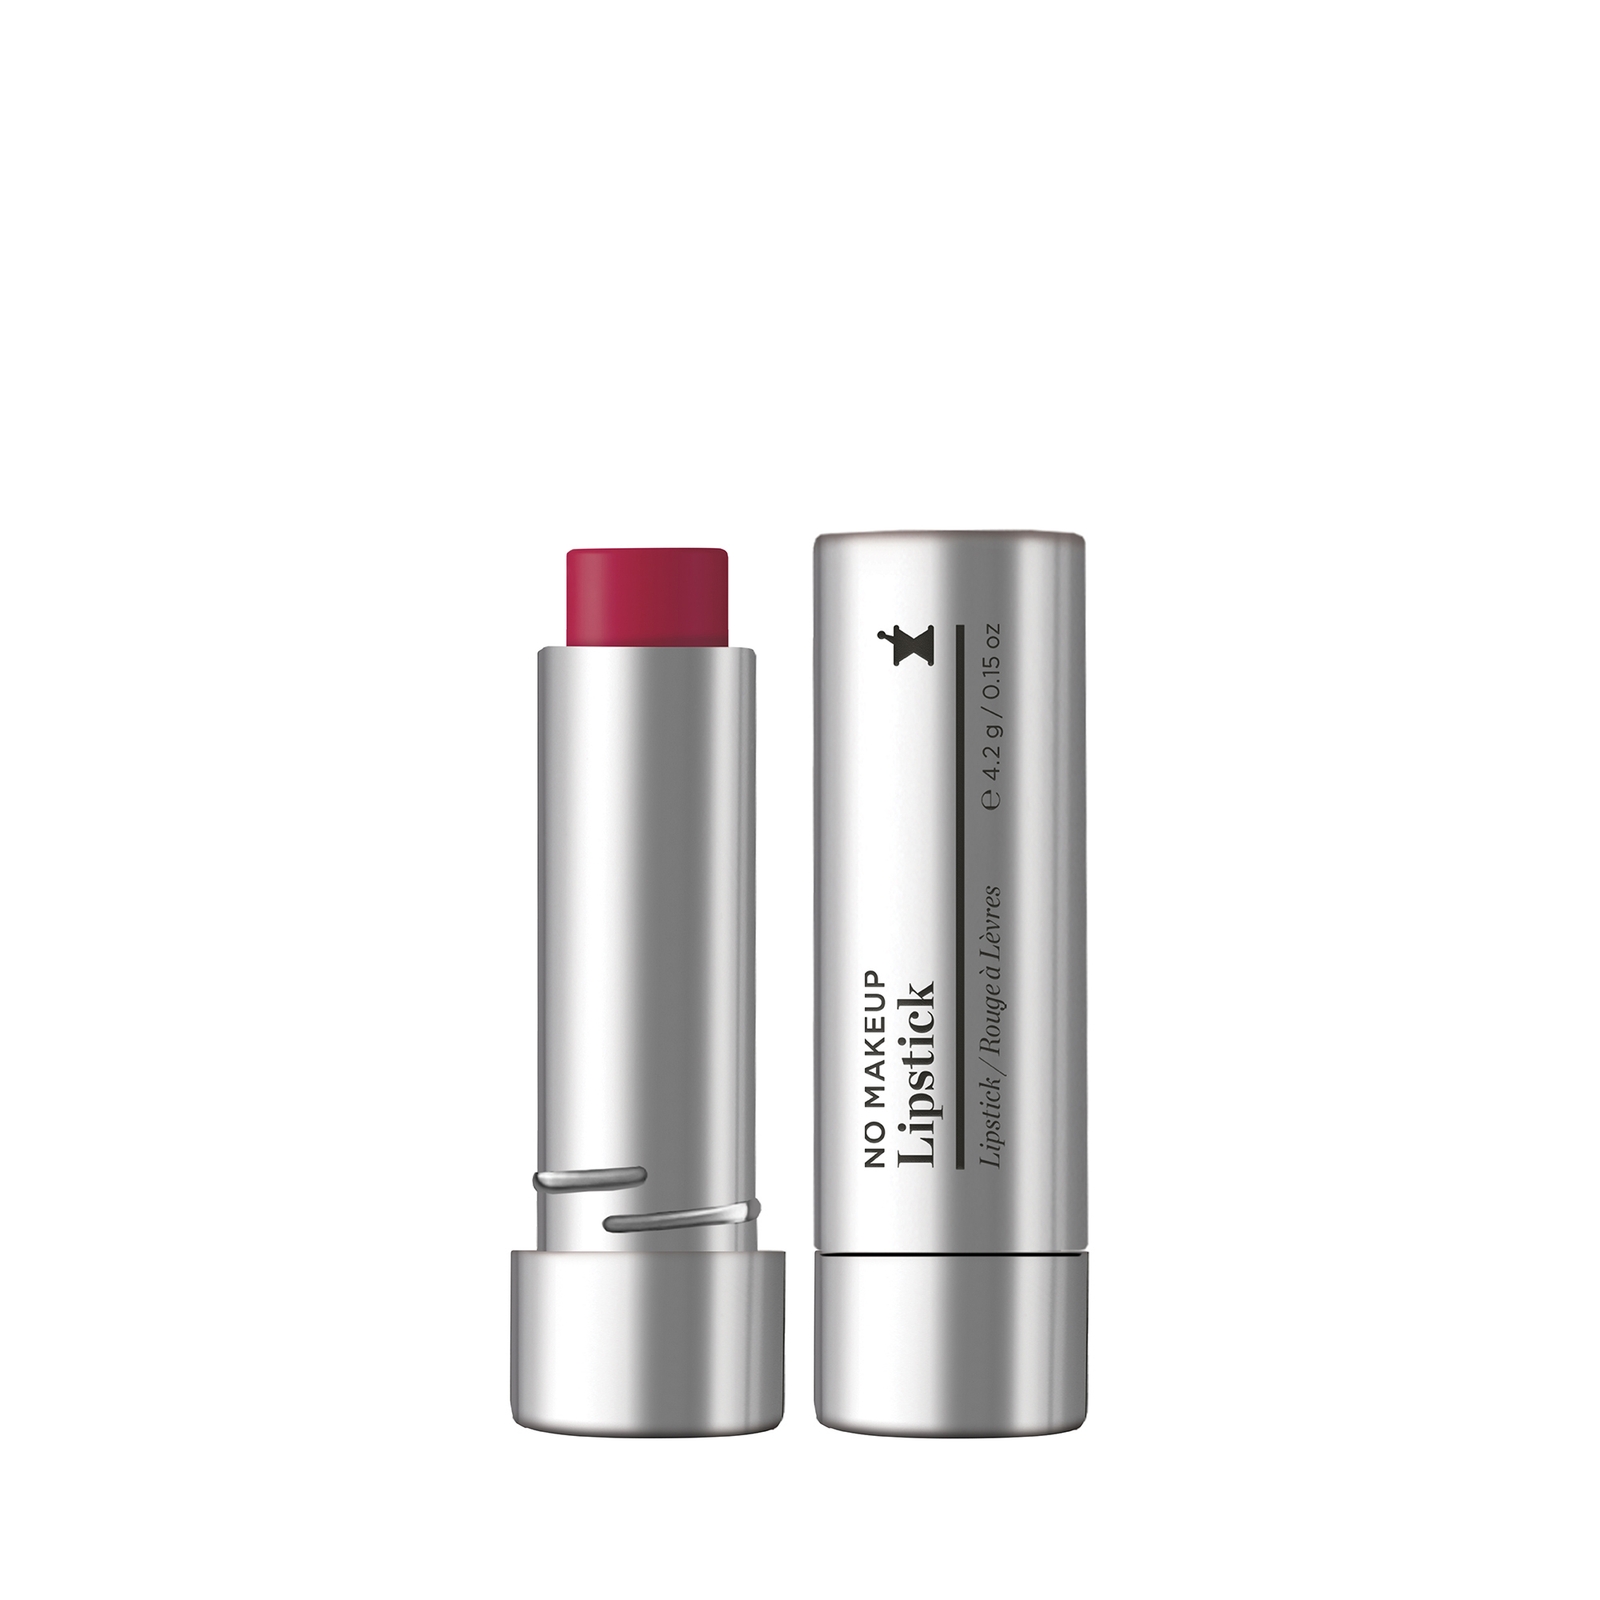 Perricone Md No Makeup Lipstick 4.5g (various Shades) In 3 Berry